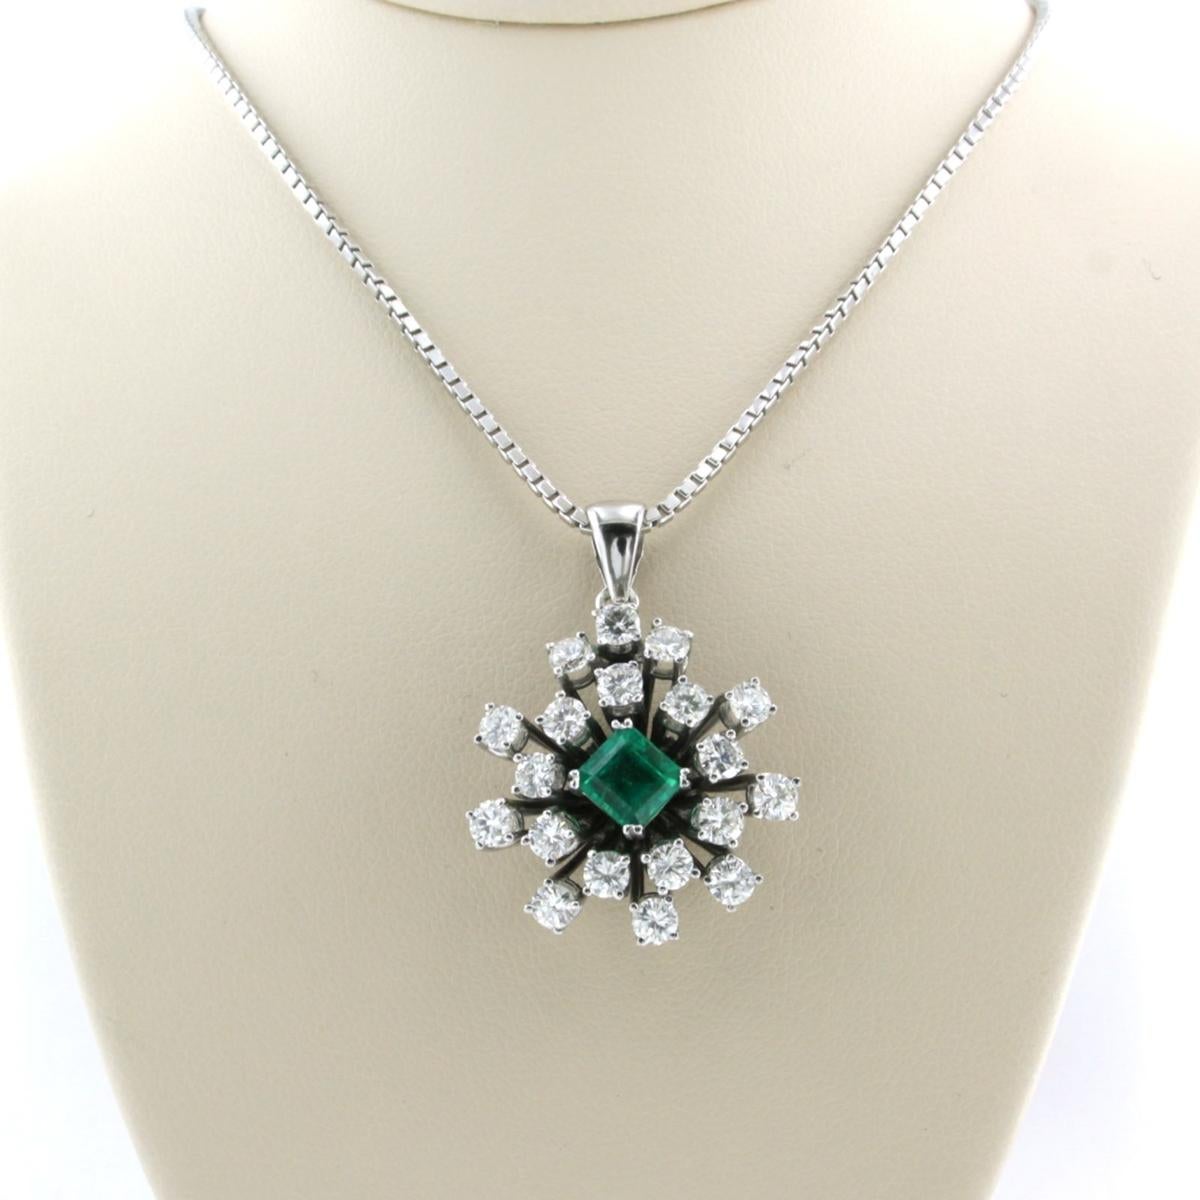 14k white gold necklace with pendant set with emerald and brilliant cut diamond 1.96 ct - F/G - VS/SI - length 42 cm

detailed description

the length of the necklace is 42 cm long by 1.3 mm wide

the pendant is 3.1 cm long by 2.2 cm wide

weight